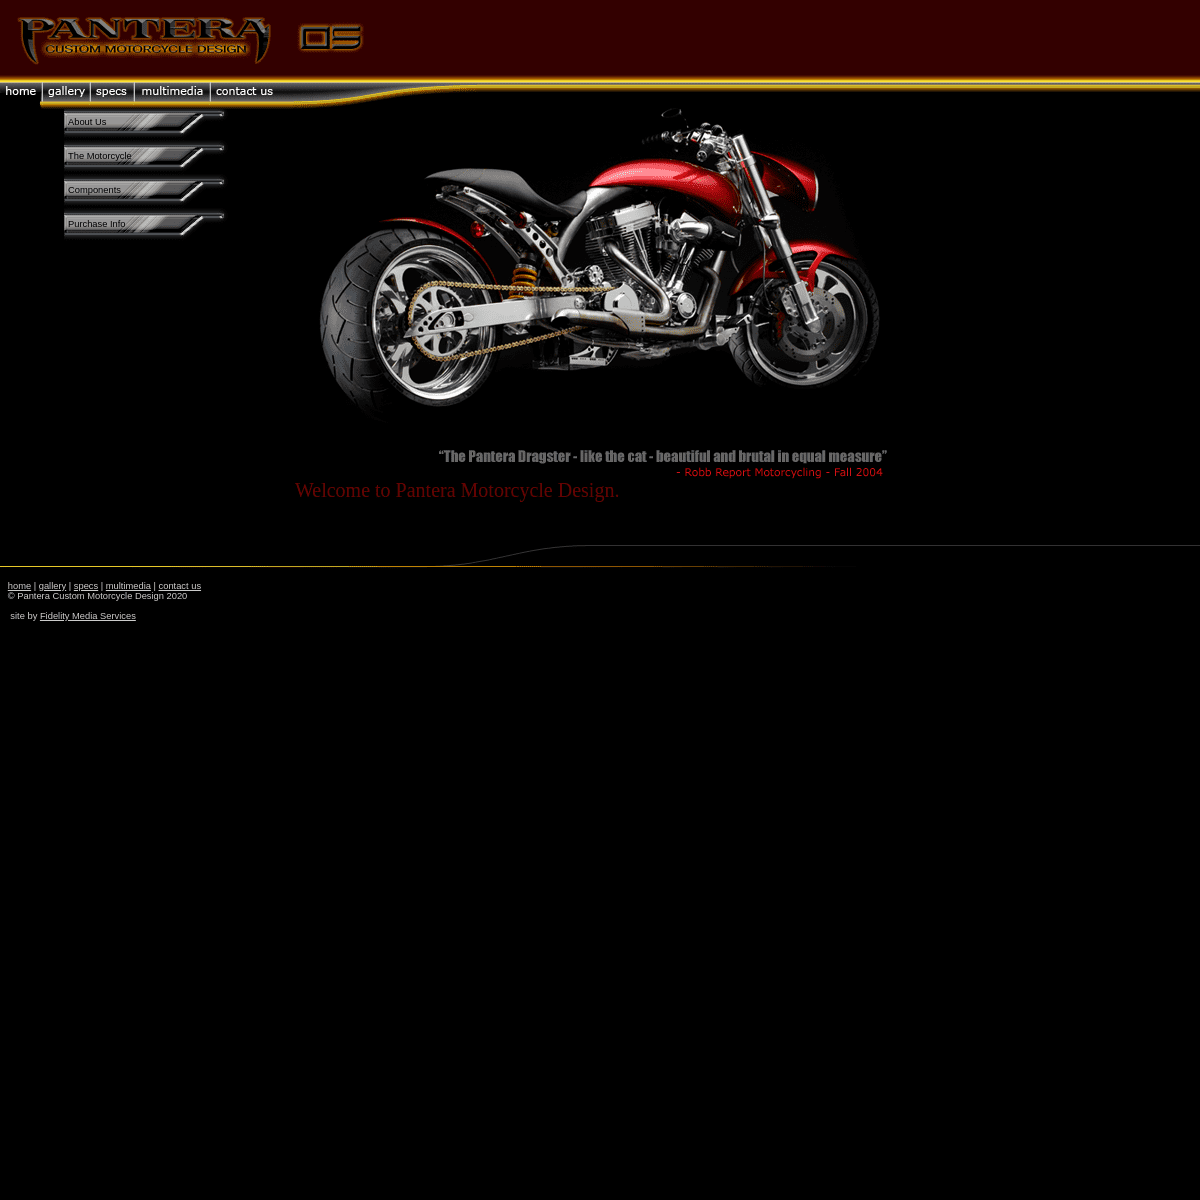 A complete backup of panteramotorcycles.com